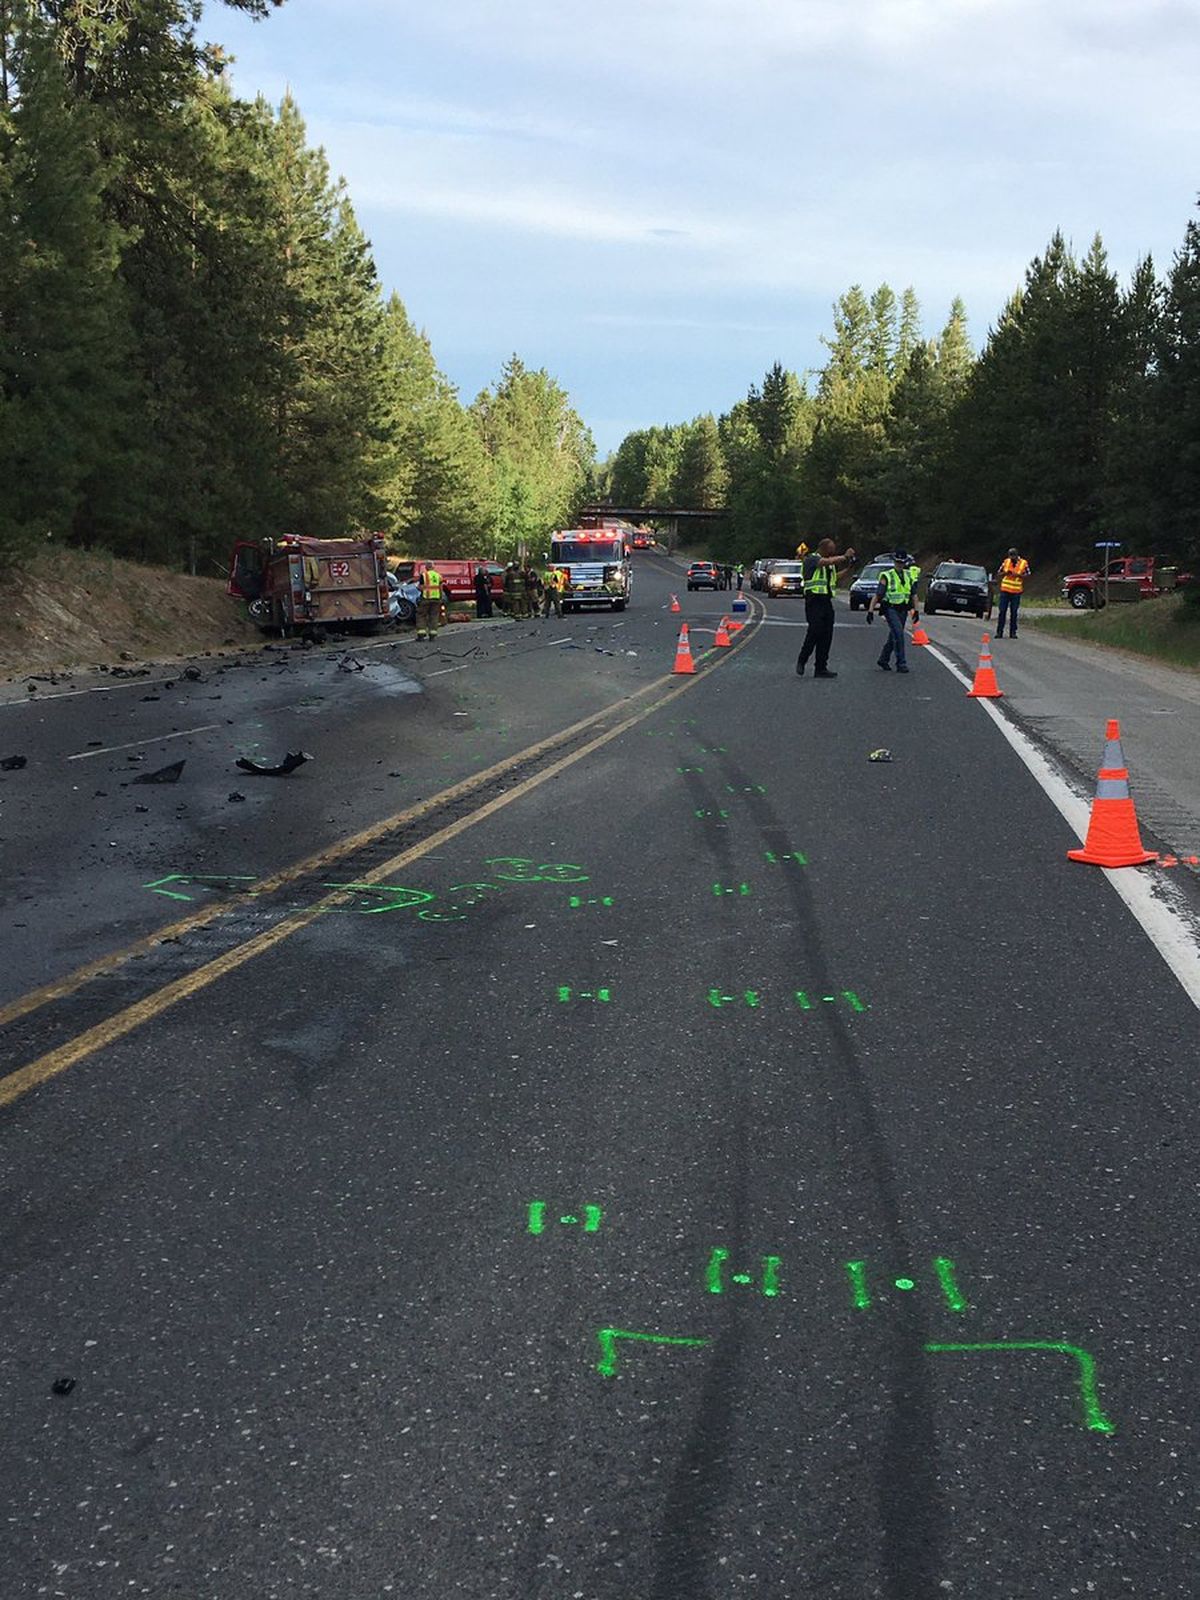 First responders are pictured at the scene of a deadly collision involving a passenger car and a fire truck along US 395 on June 7.   (Trooper Jeff Sevigney/Washington State Patrol)